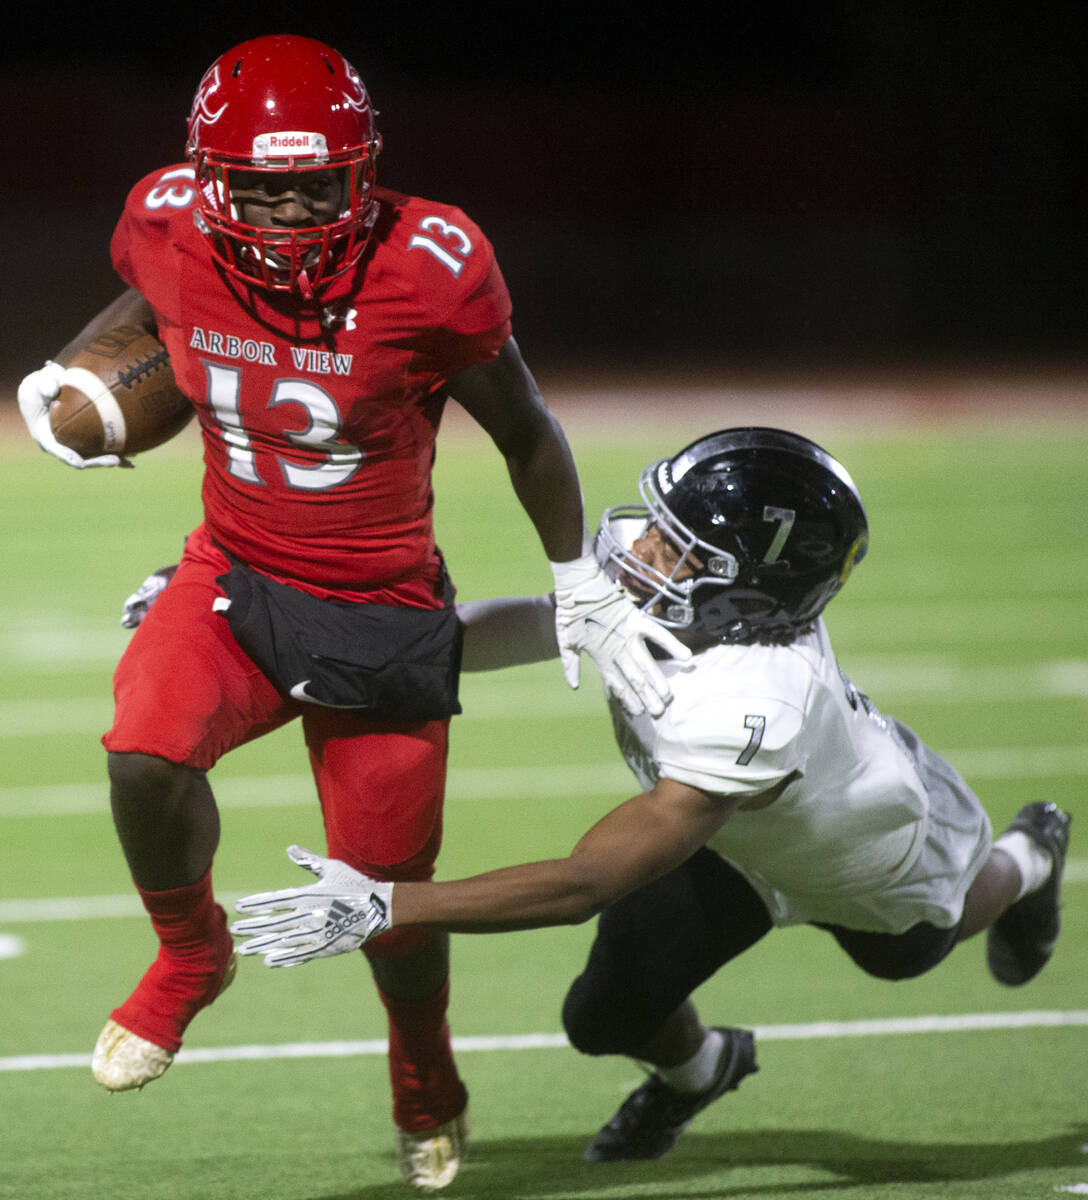 Arbor View's D'Andre Washington (13) outruns Desert Pines' Omar Ali (7) during a high school fo ...